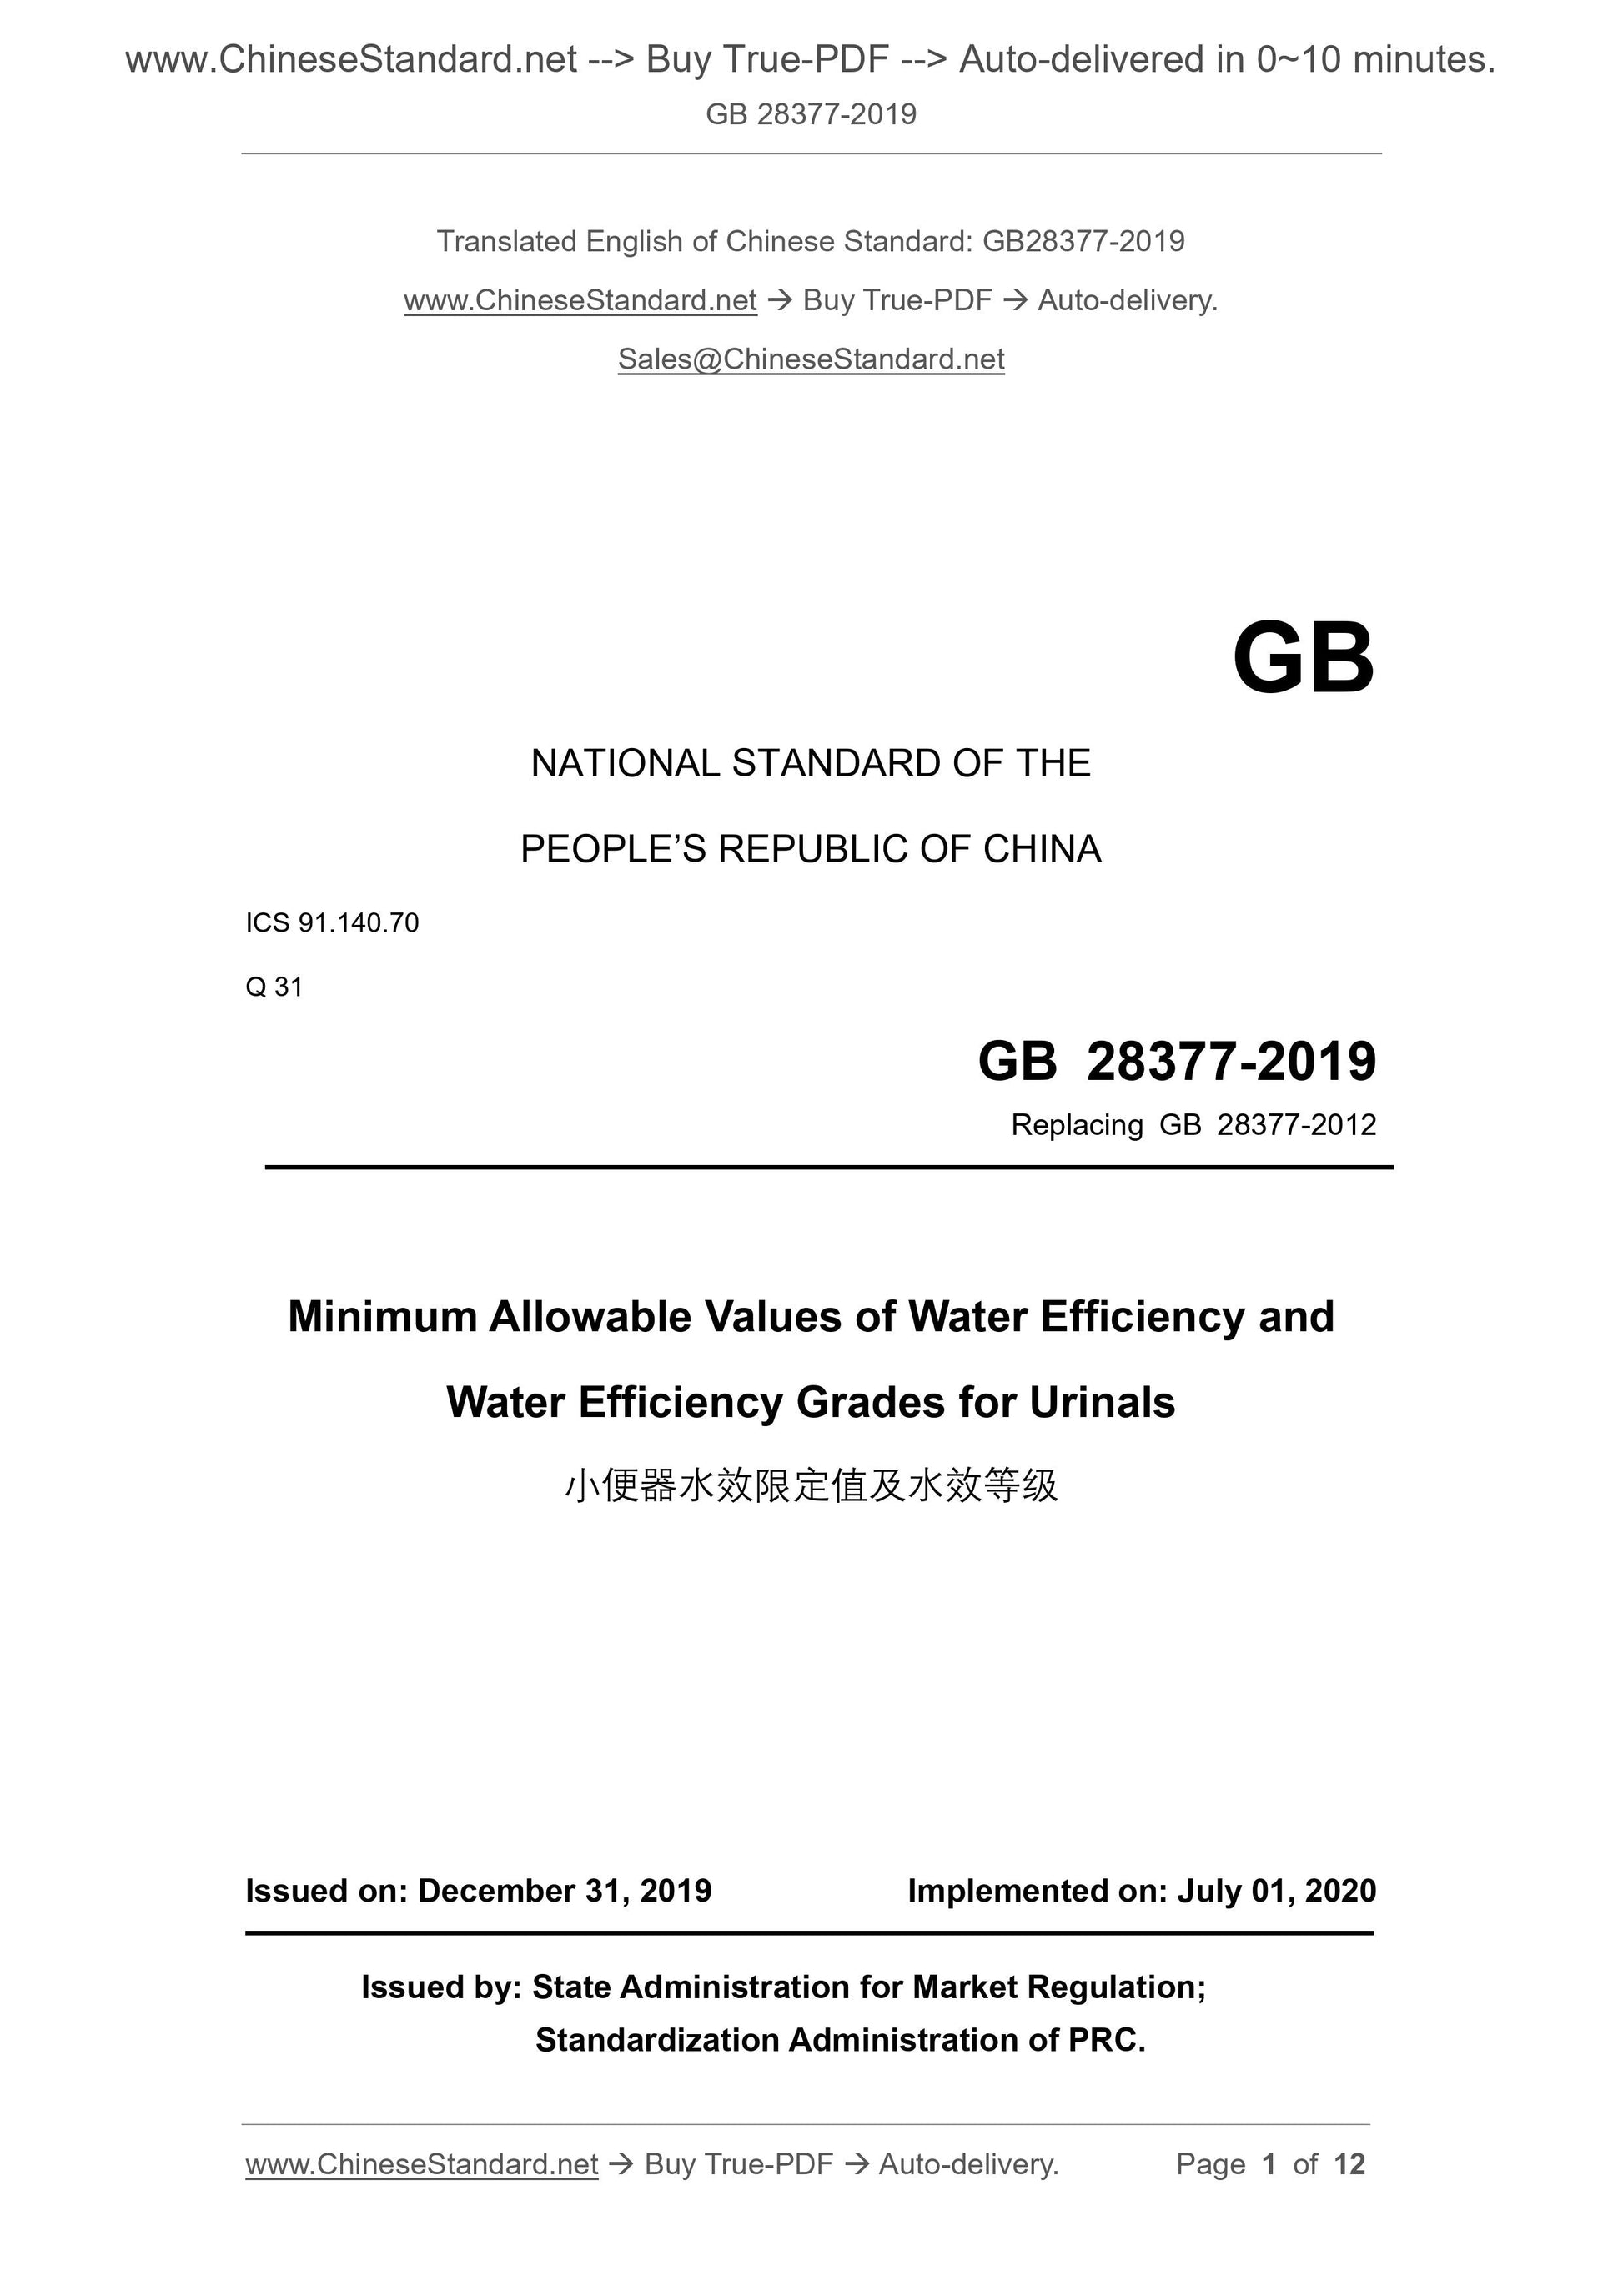 GB 28377-2019 Page 1